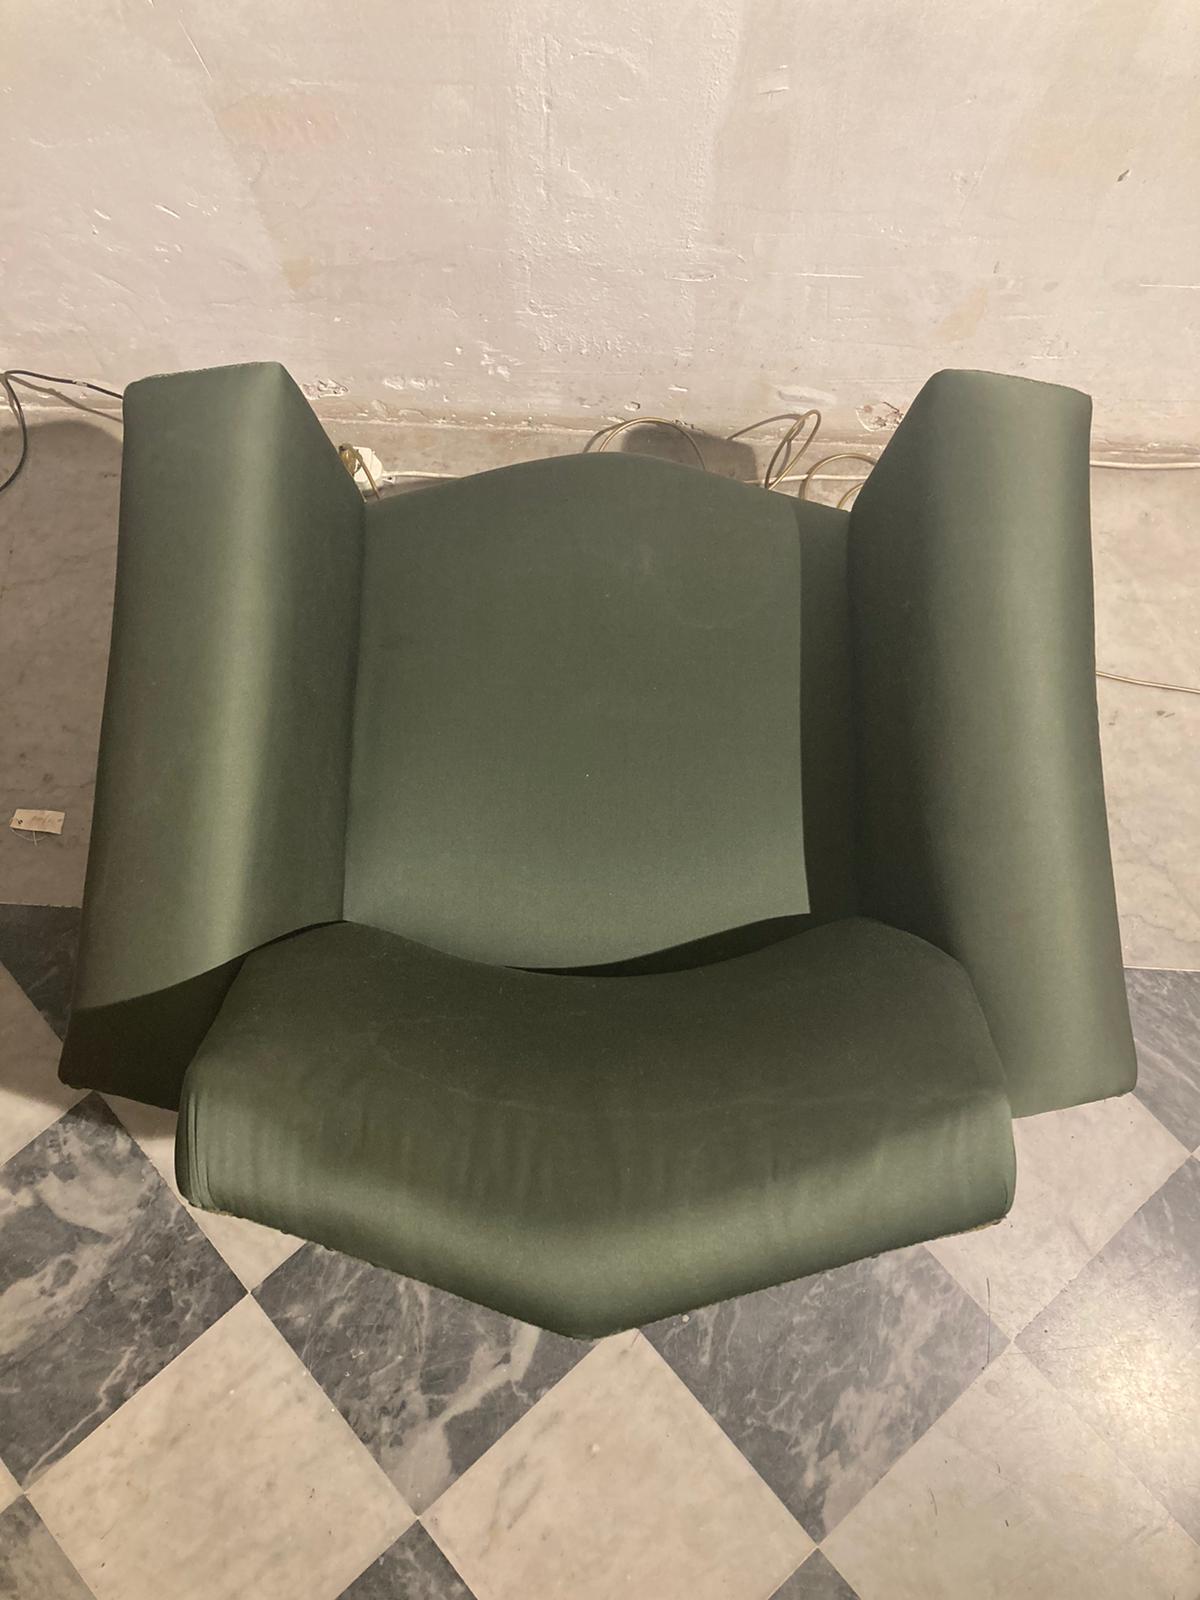 Lenci armchair is a midcentury design furniture manufactured in 1950s by Fabio Lenci.

Beautiful and vintage green silkcover armchair

Good conditions.

Very rare iconic armchair of great success and popularity.

Fabio Lenci was born in Rome